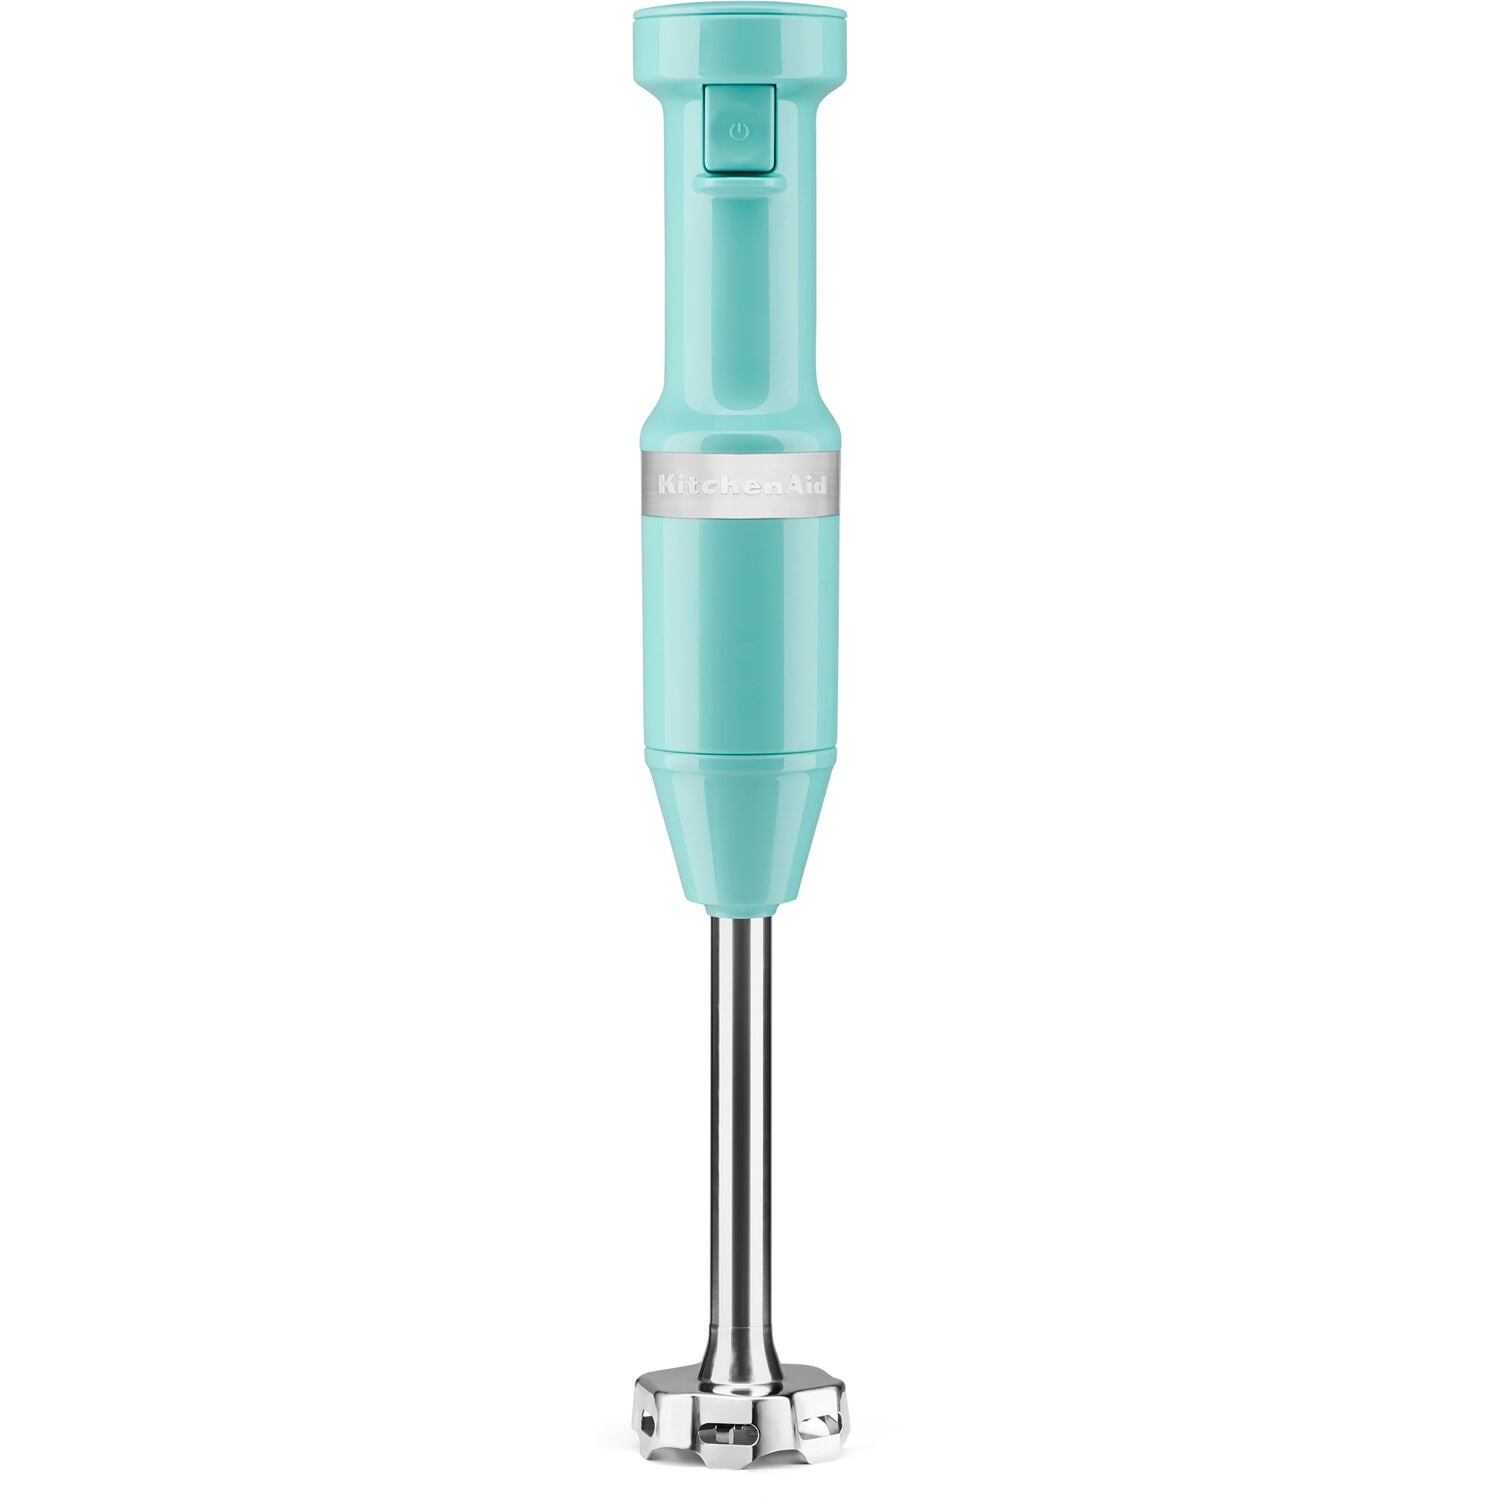 https://ak1.ostkcdn.com/images/products/is/images/direct/b9641735eb71ab373274a9bf907042153504a79f/KitchenAid-Corded-Variable-Speed-Immersion-Blender-in-Aqua-Sky-with-Blending-Jar.jpg